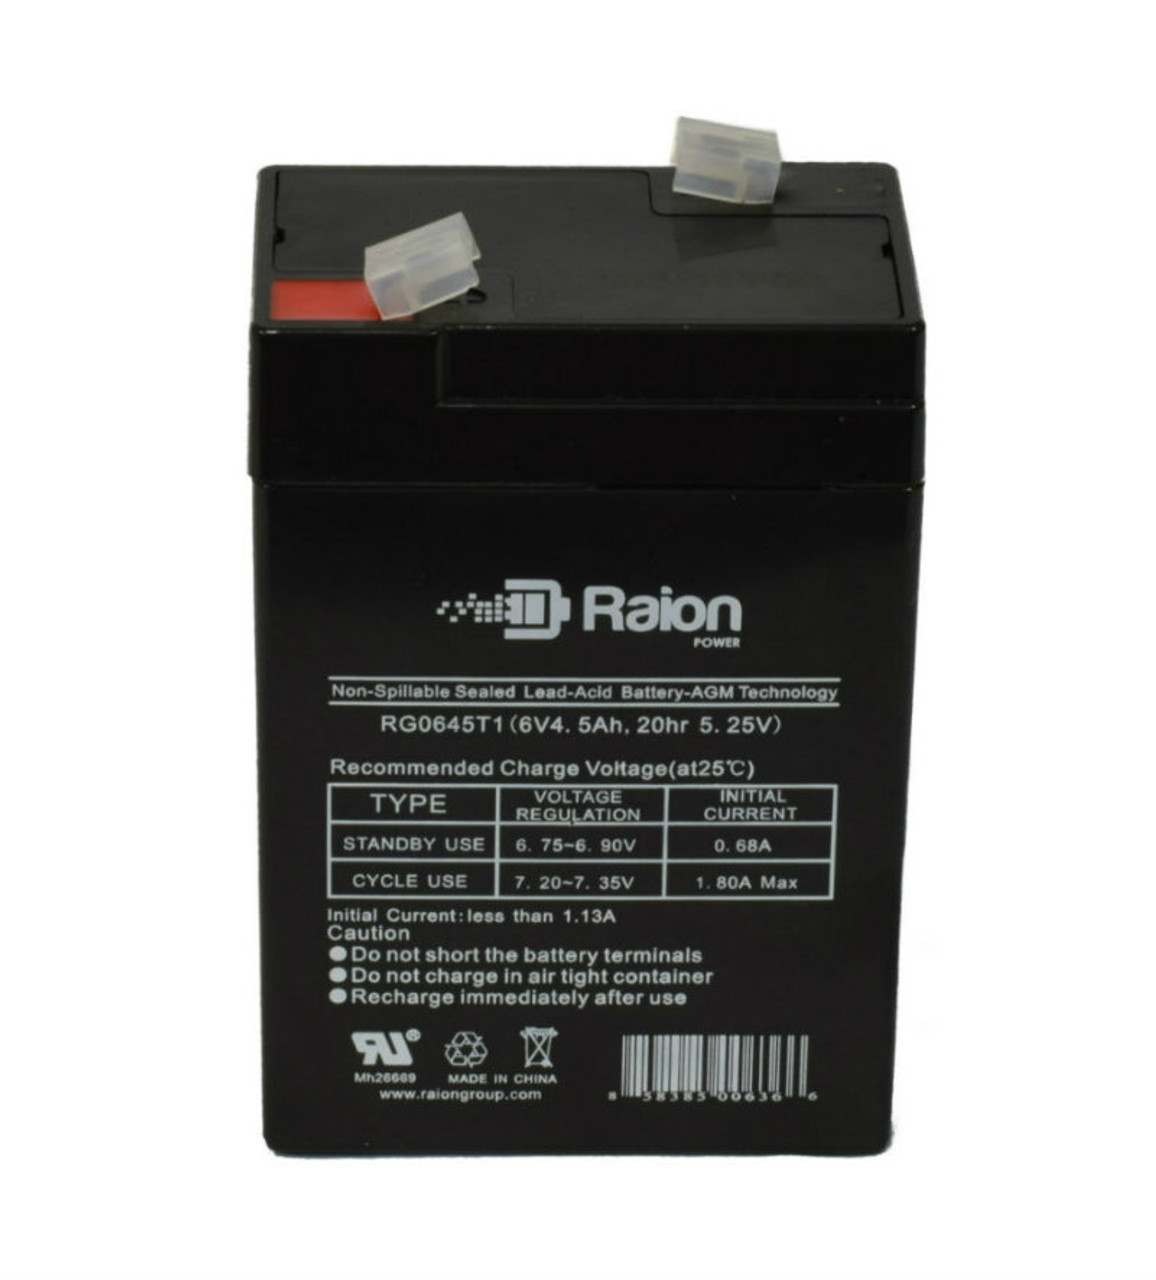 Raion Power RG0645T1 Replacement Battery Cartridge for Baxter Healthcare 521 MICROATE Infusion Pump